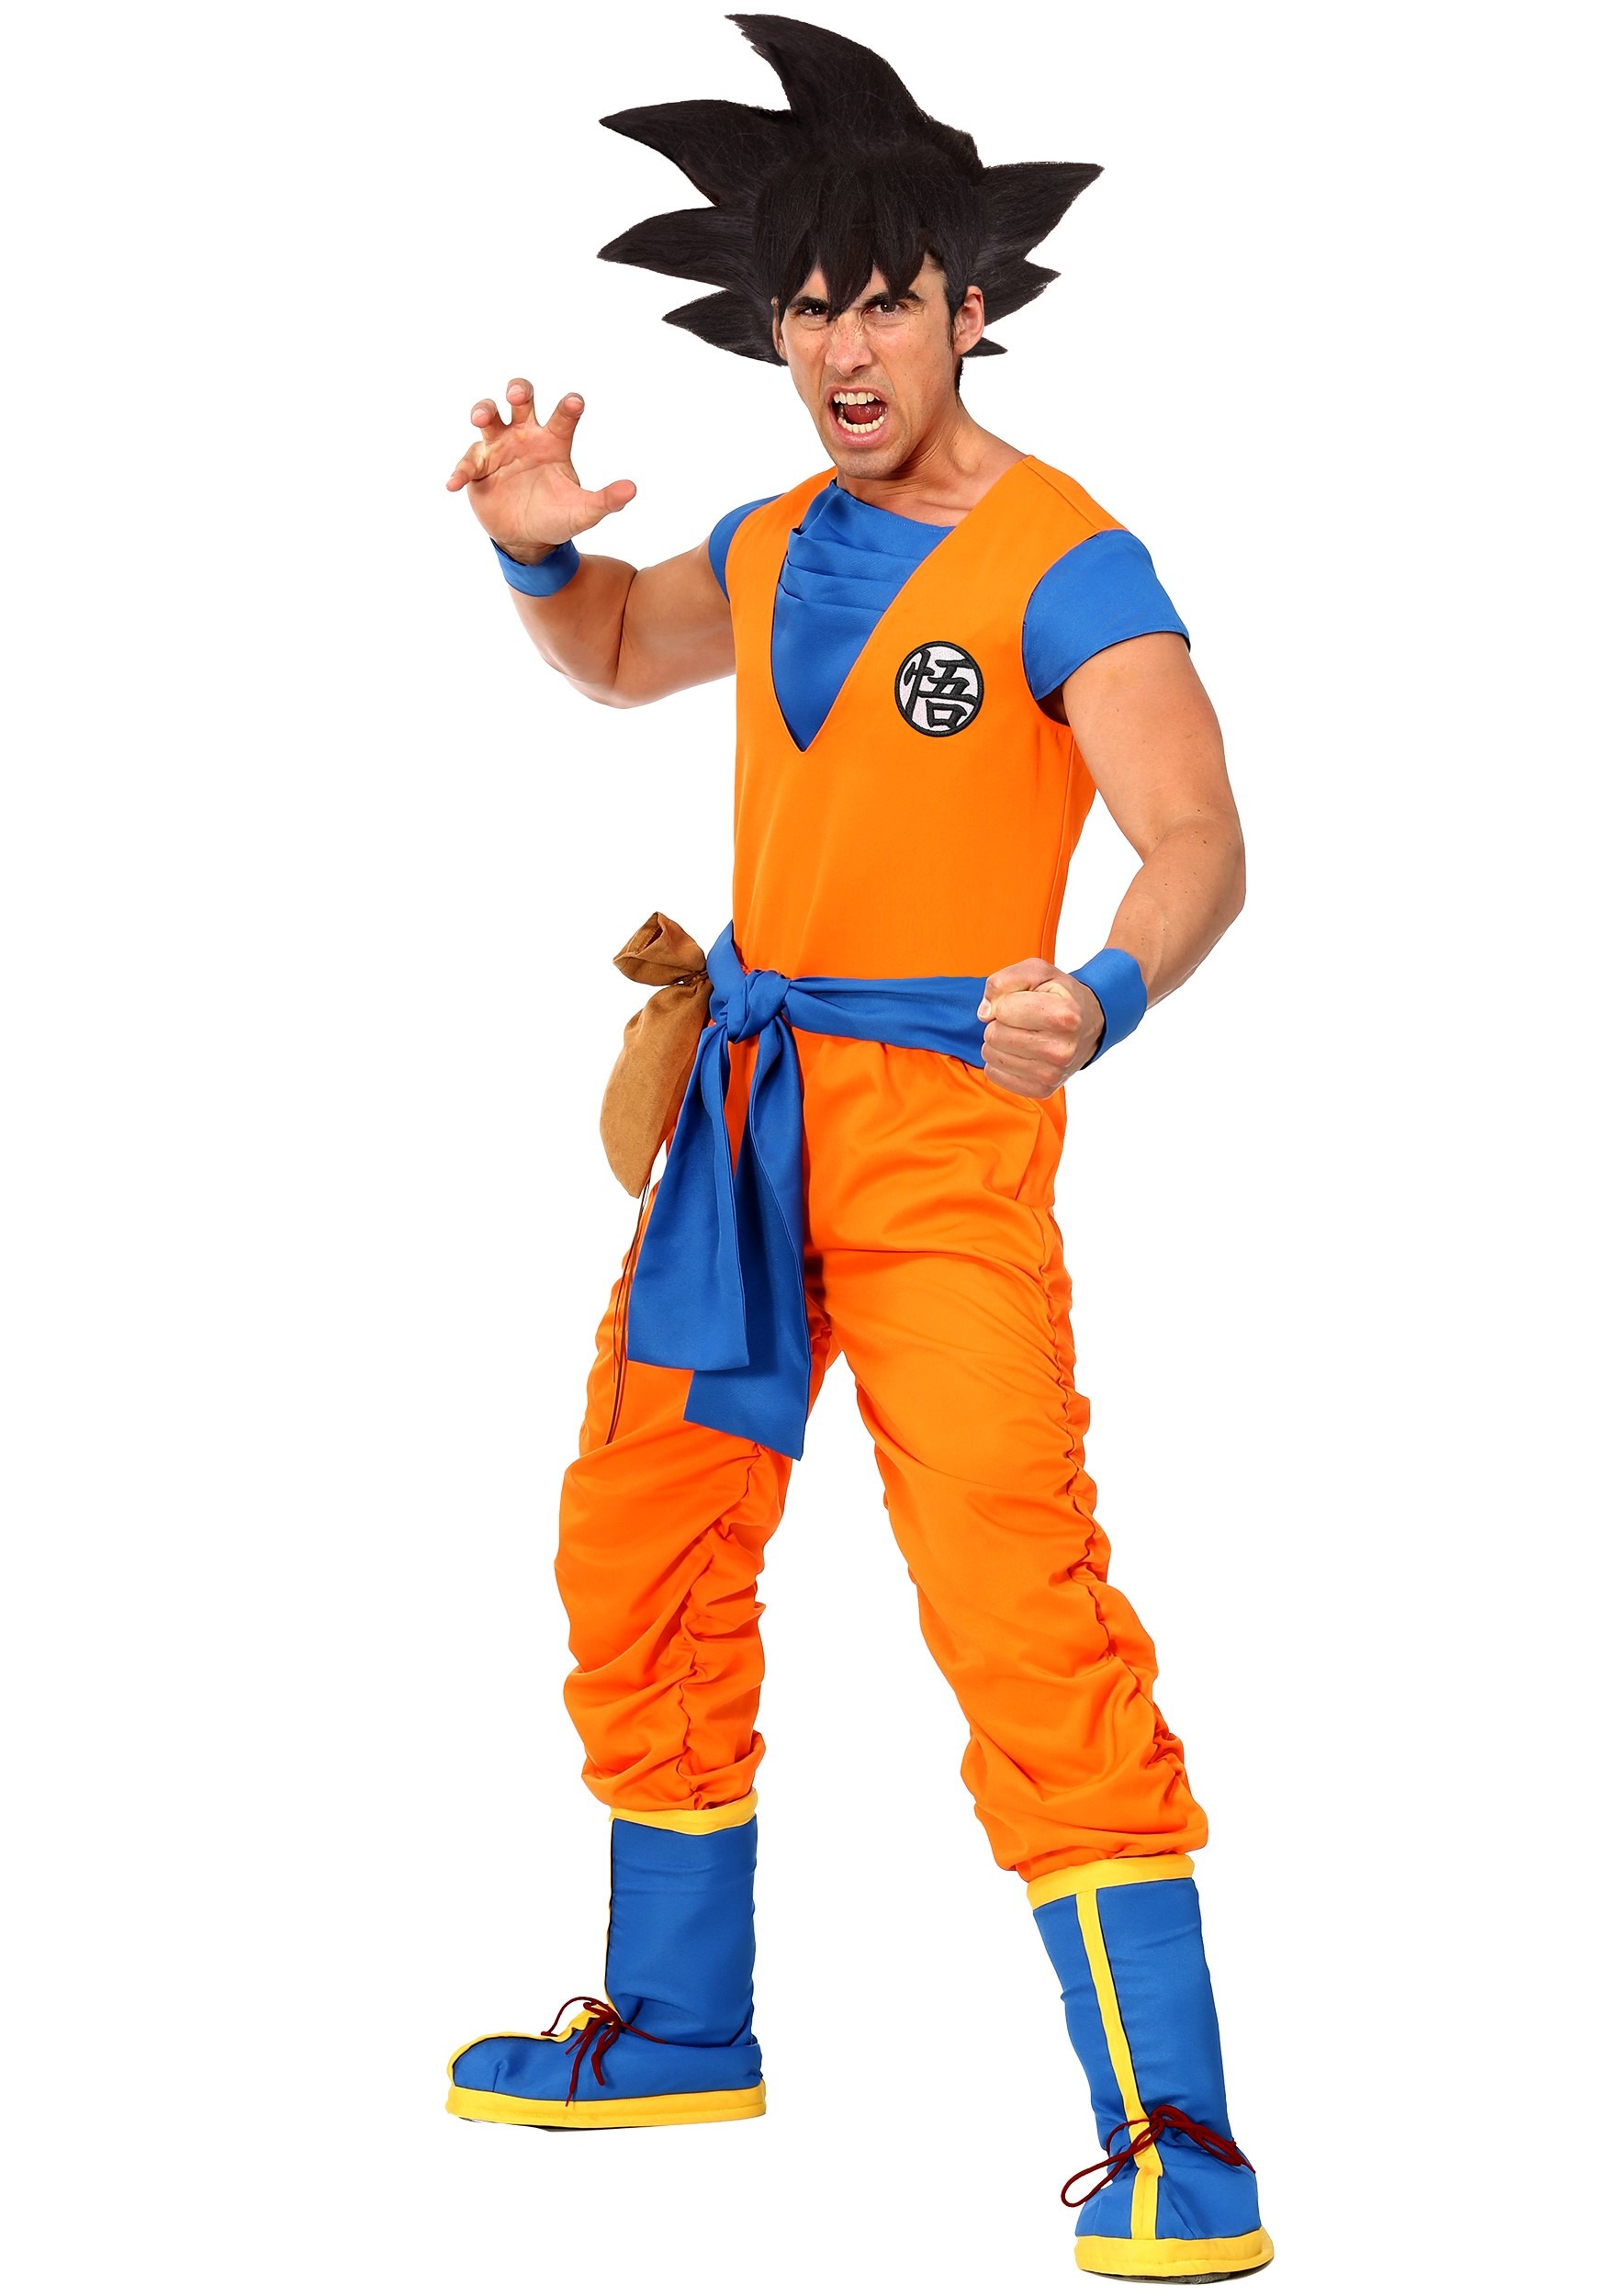 Authentic Dragon Ball Z Goku Costume for Adults